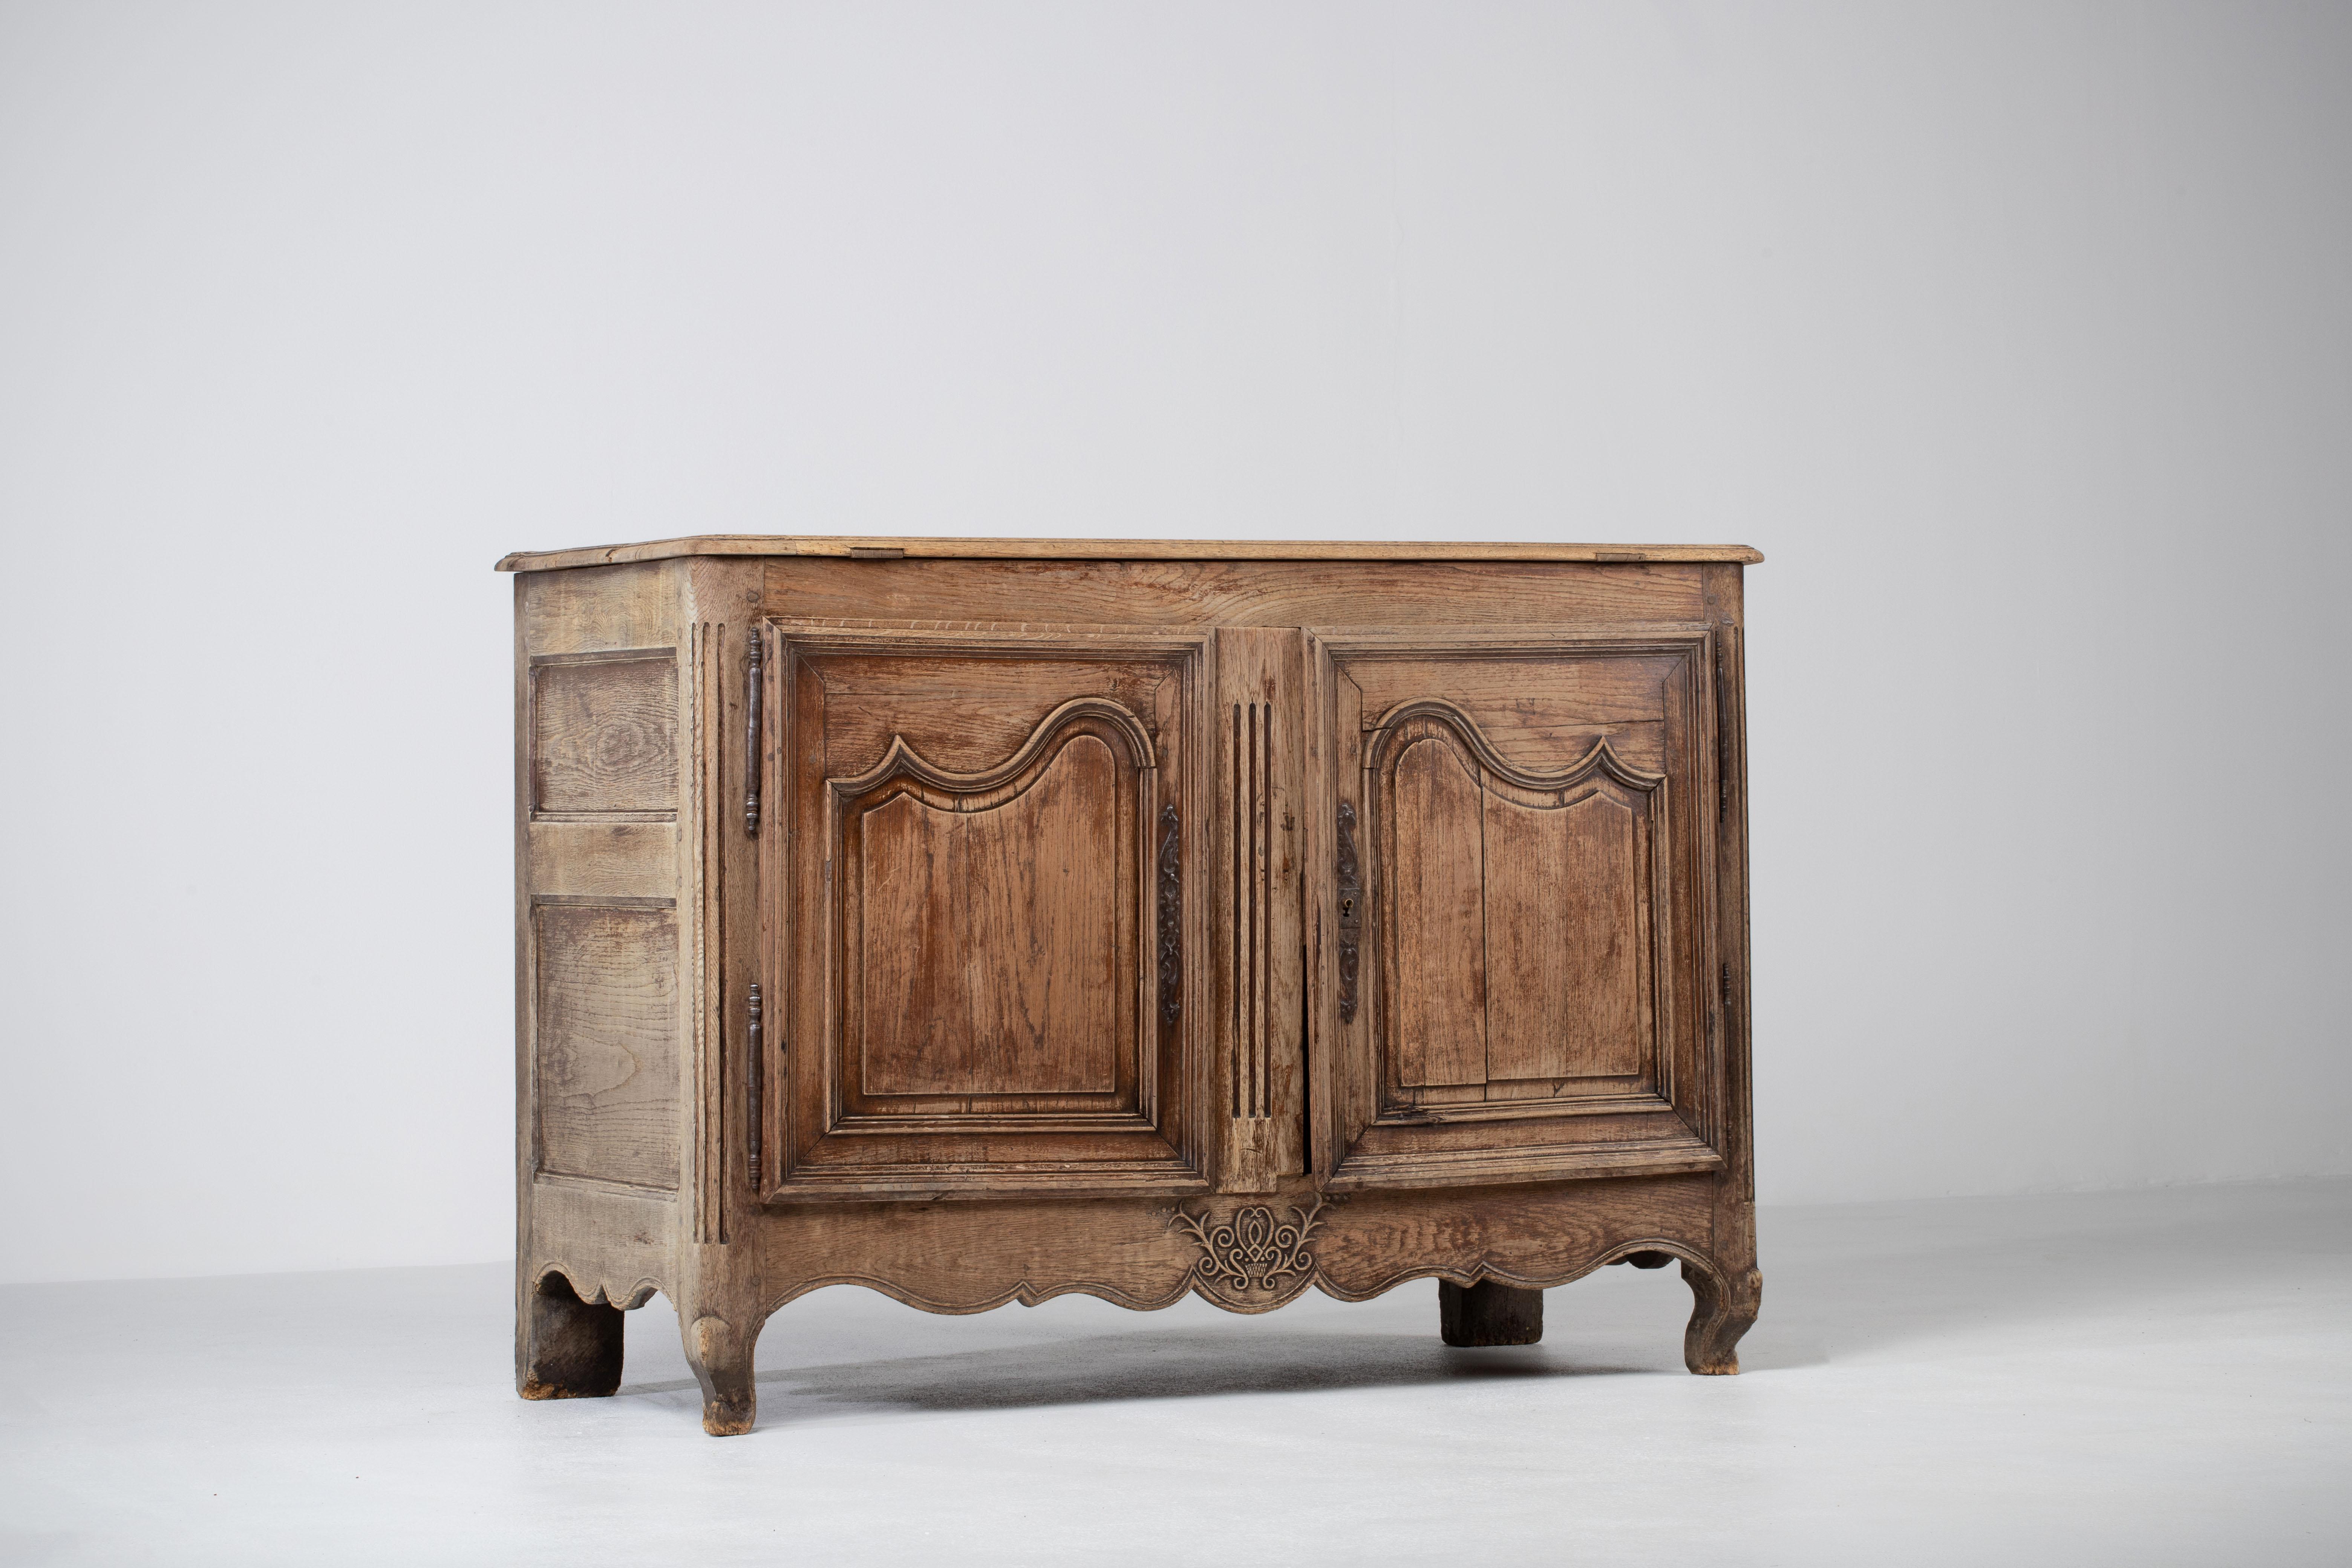 A two door and drawer provencal cabinet from France, circa 1890. Representing the casual yet refined aesthetic of the French countryside, patinated, enhancing the natural textured figure of the wood and subtle carved ornament. 
A testament to the